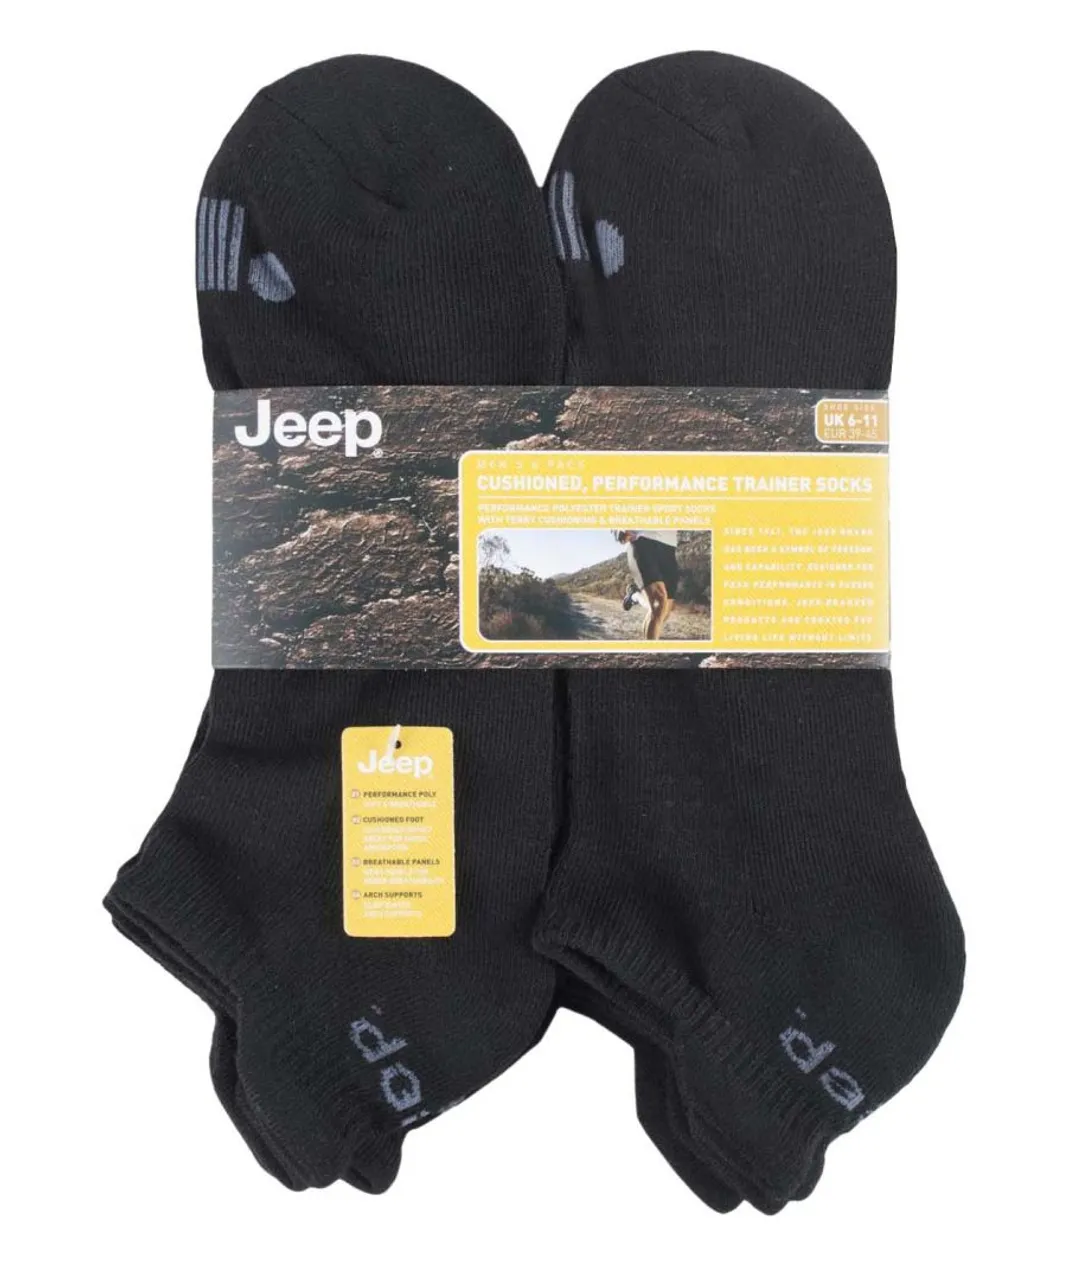 Jeep - 6 Pairs Mens Cotton Cushioned Sport Ankle Outdoor Socks - Black